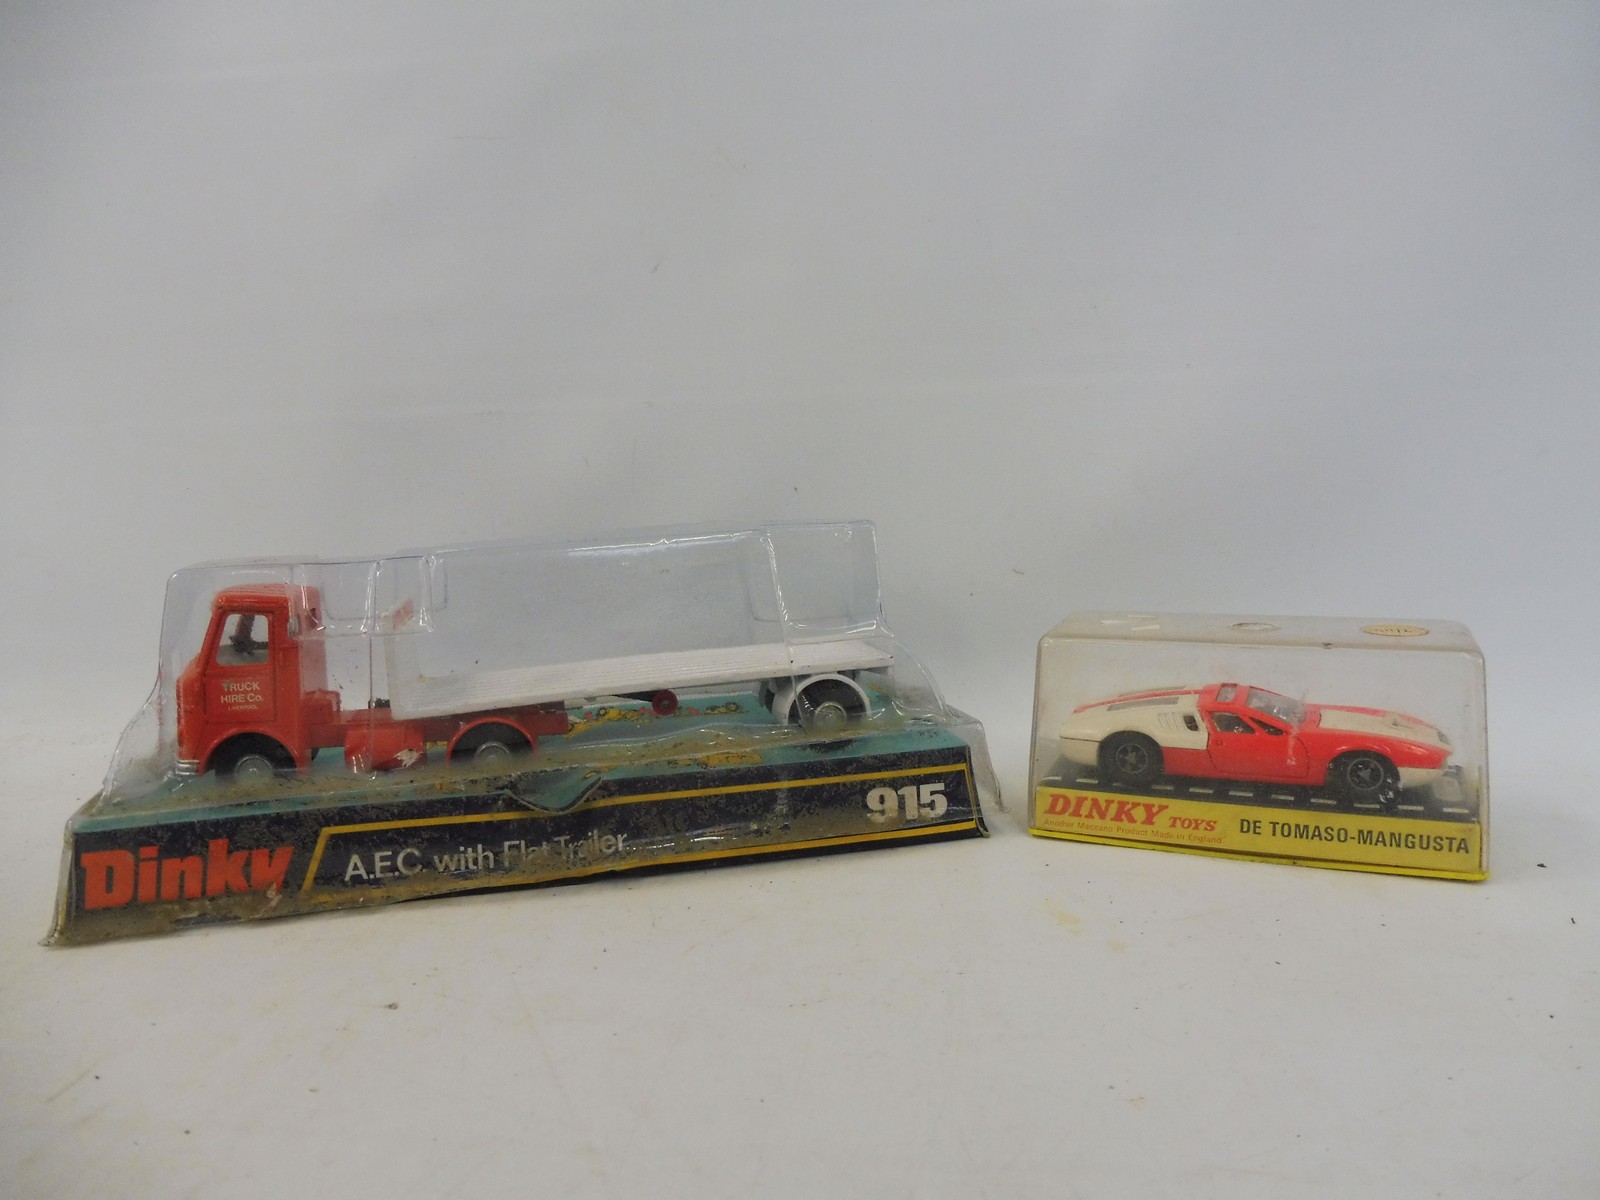 Two circa 1970s Dinky models, one an AEC flat trailer, the other a De Tomaso Mangusta. - Image 2 of 2